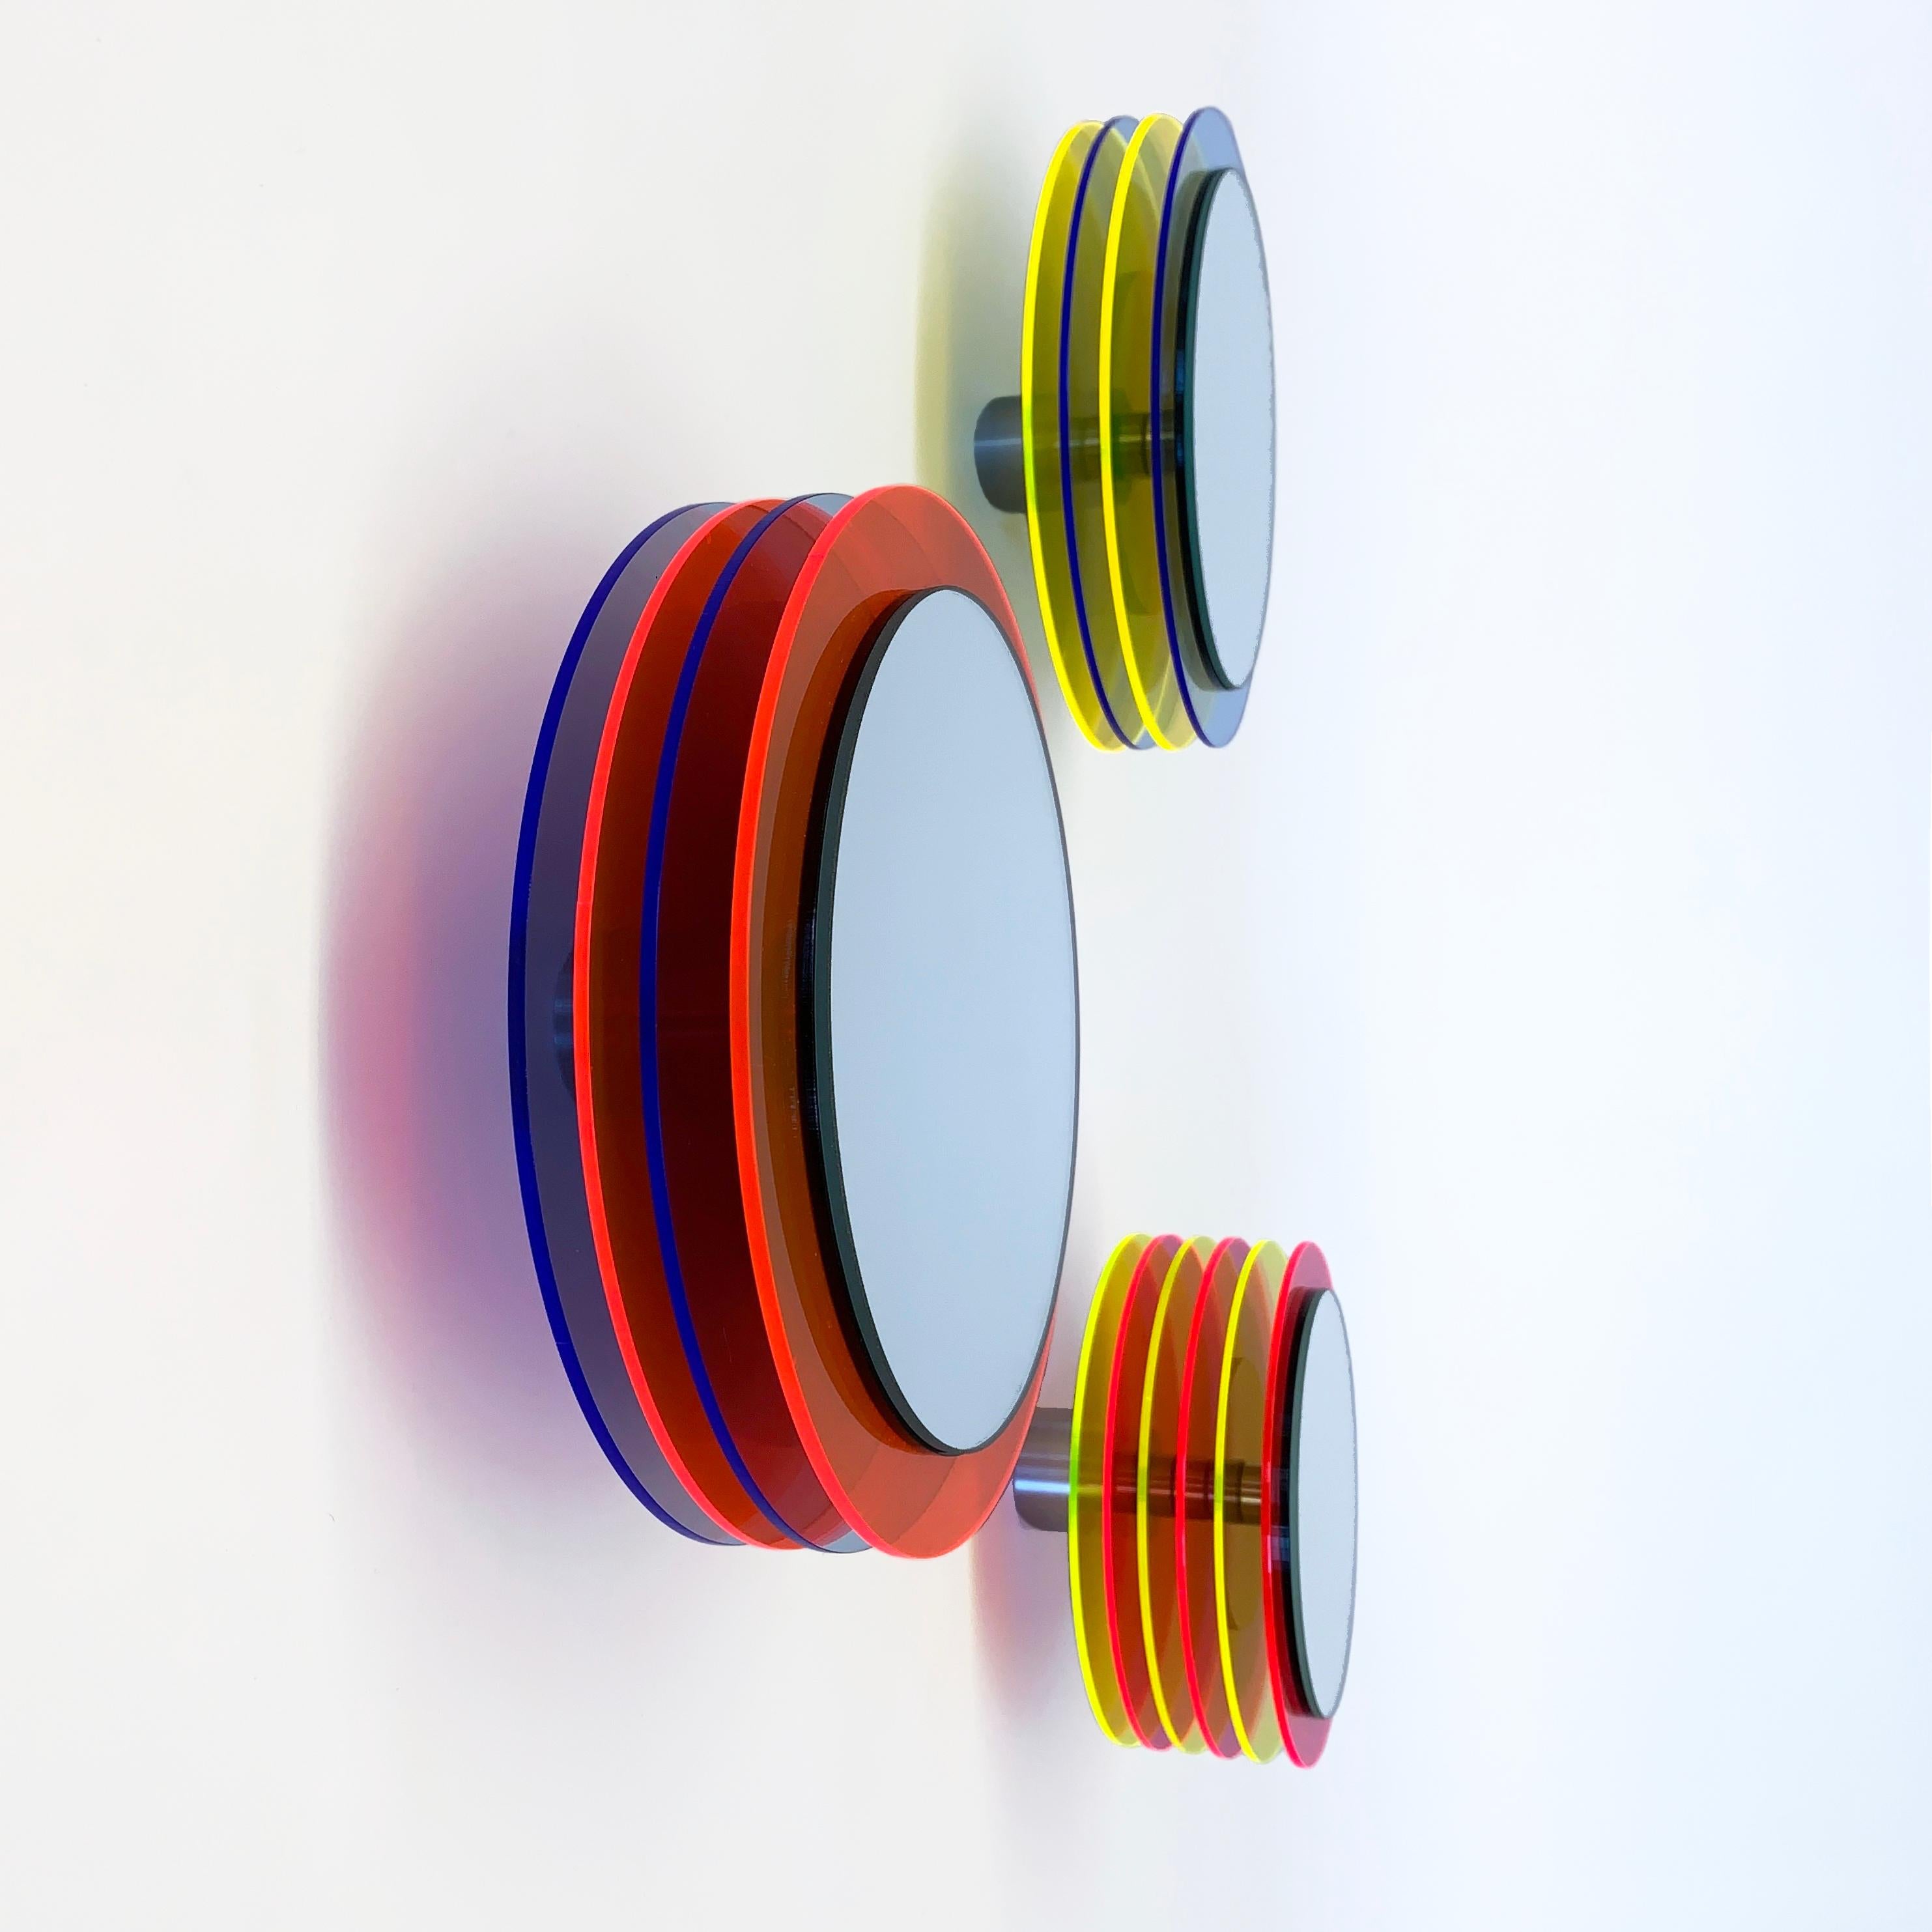 Reduced forms create fascinating wall sculptures, a play with translucently, ambient light and color.

The mirror objects float in front of the wall and create fascinating sculptures full of positive energy through color, light and translucency and